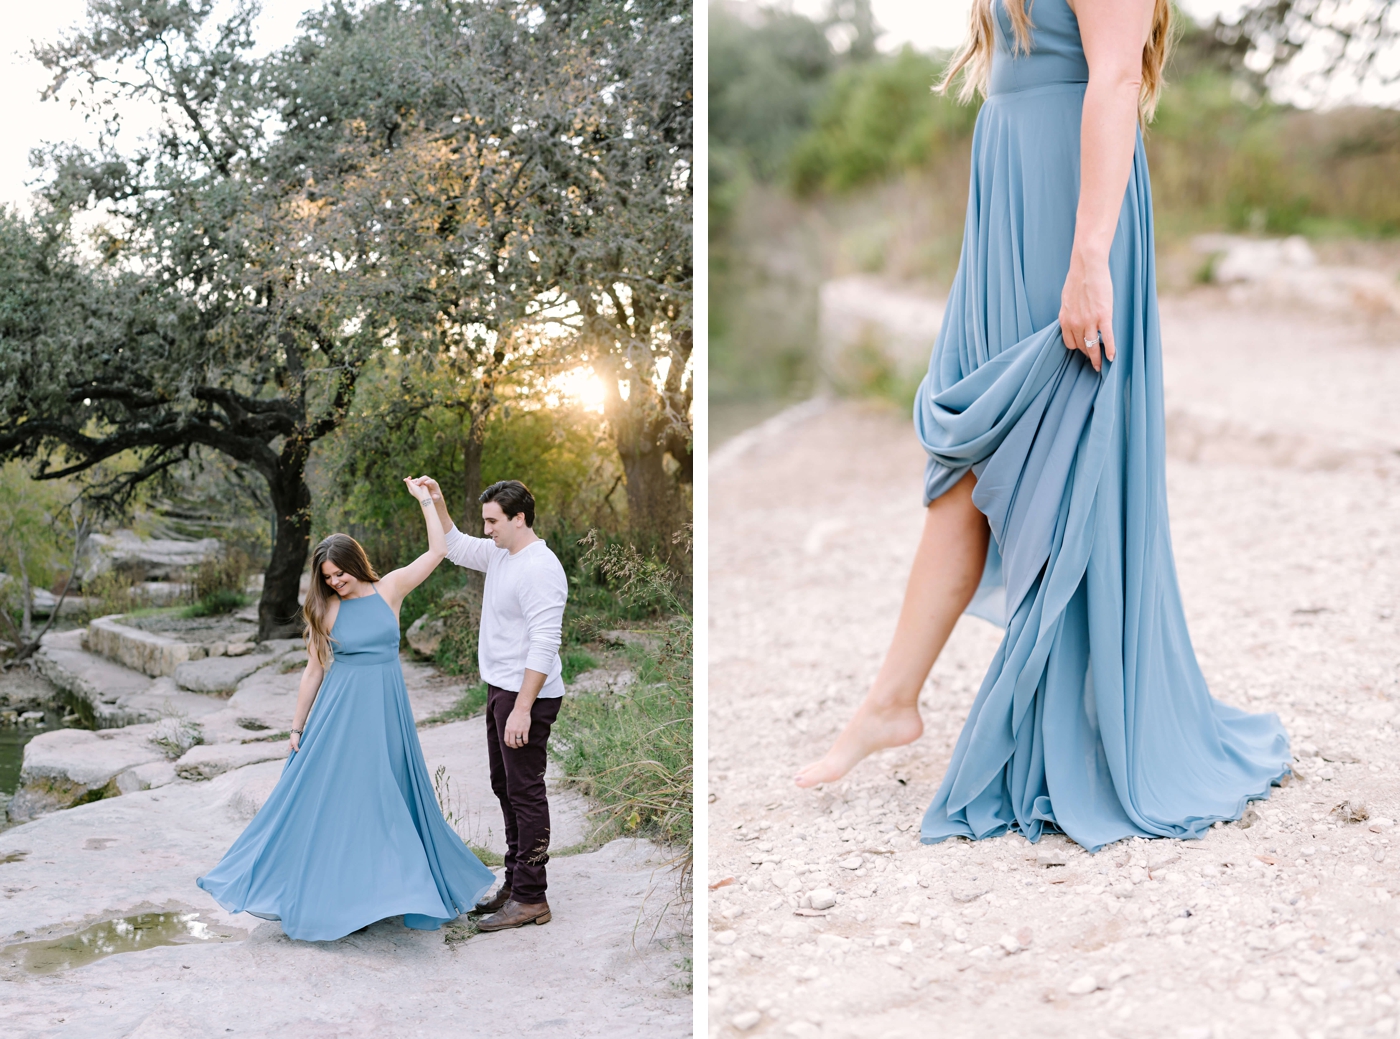 How to pick your engagement session outfit